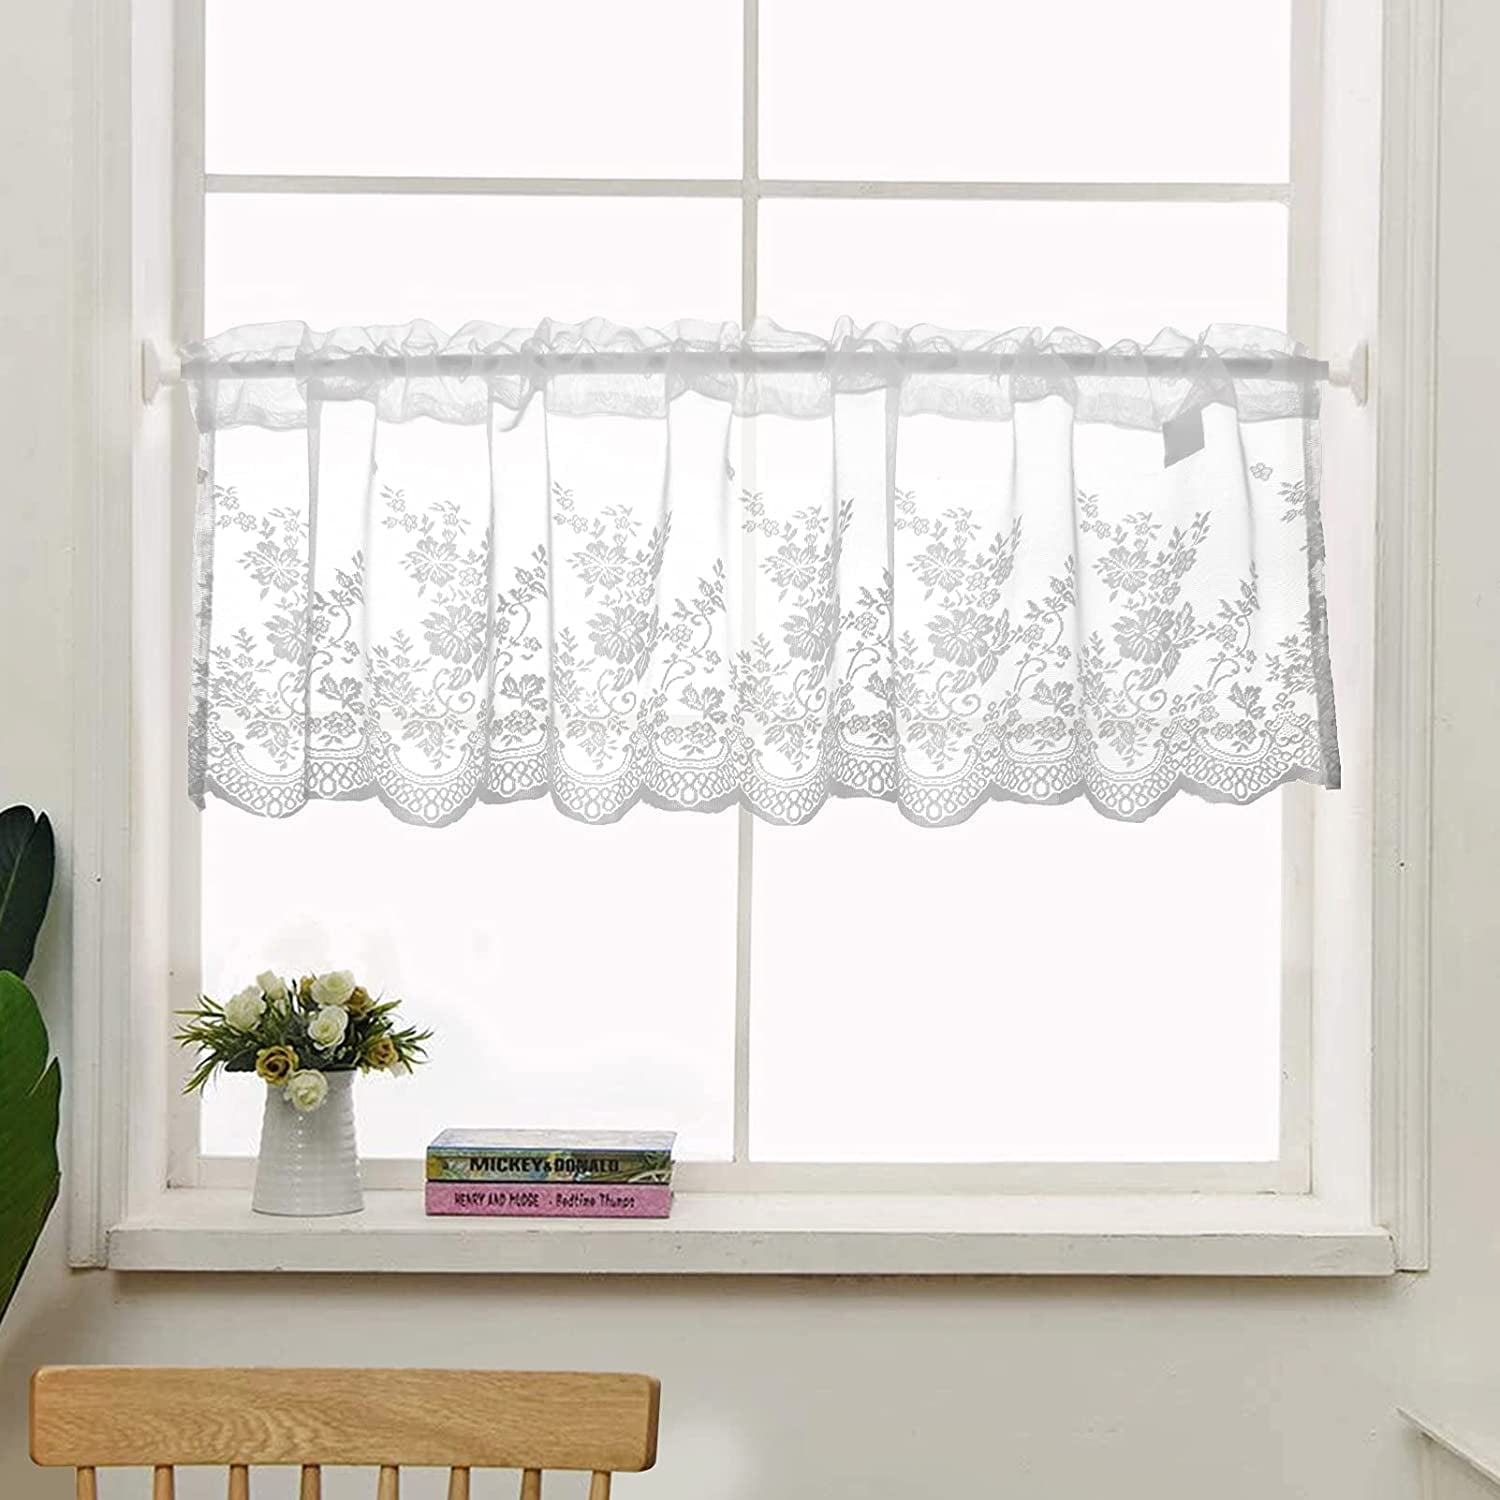 69" W Daisy Grommet Vintage Kitchen Sheer Cafe Curtains White Sheer Tier Curtain 